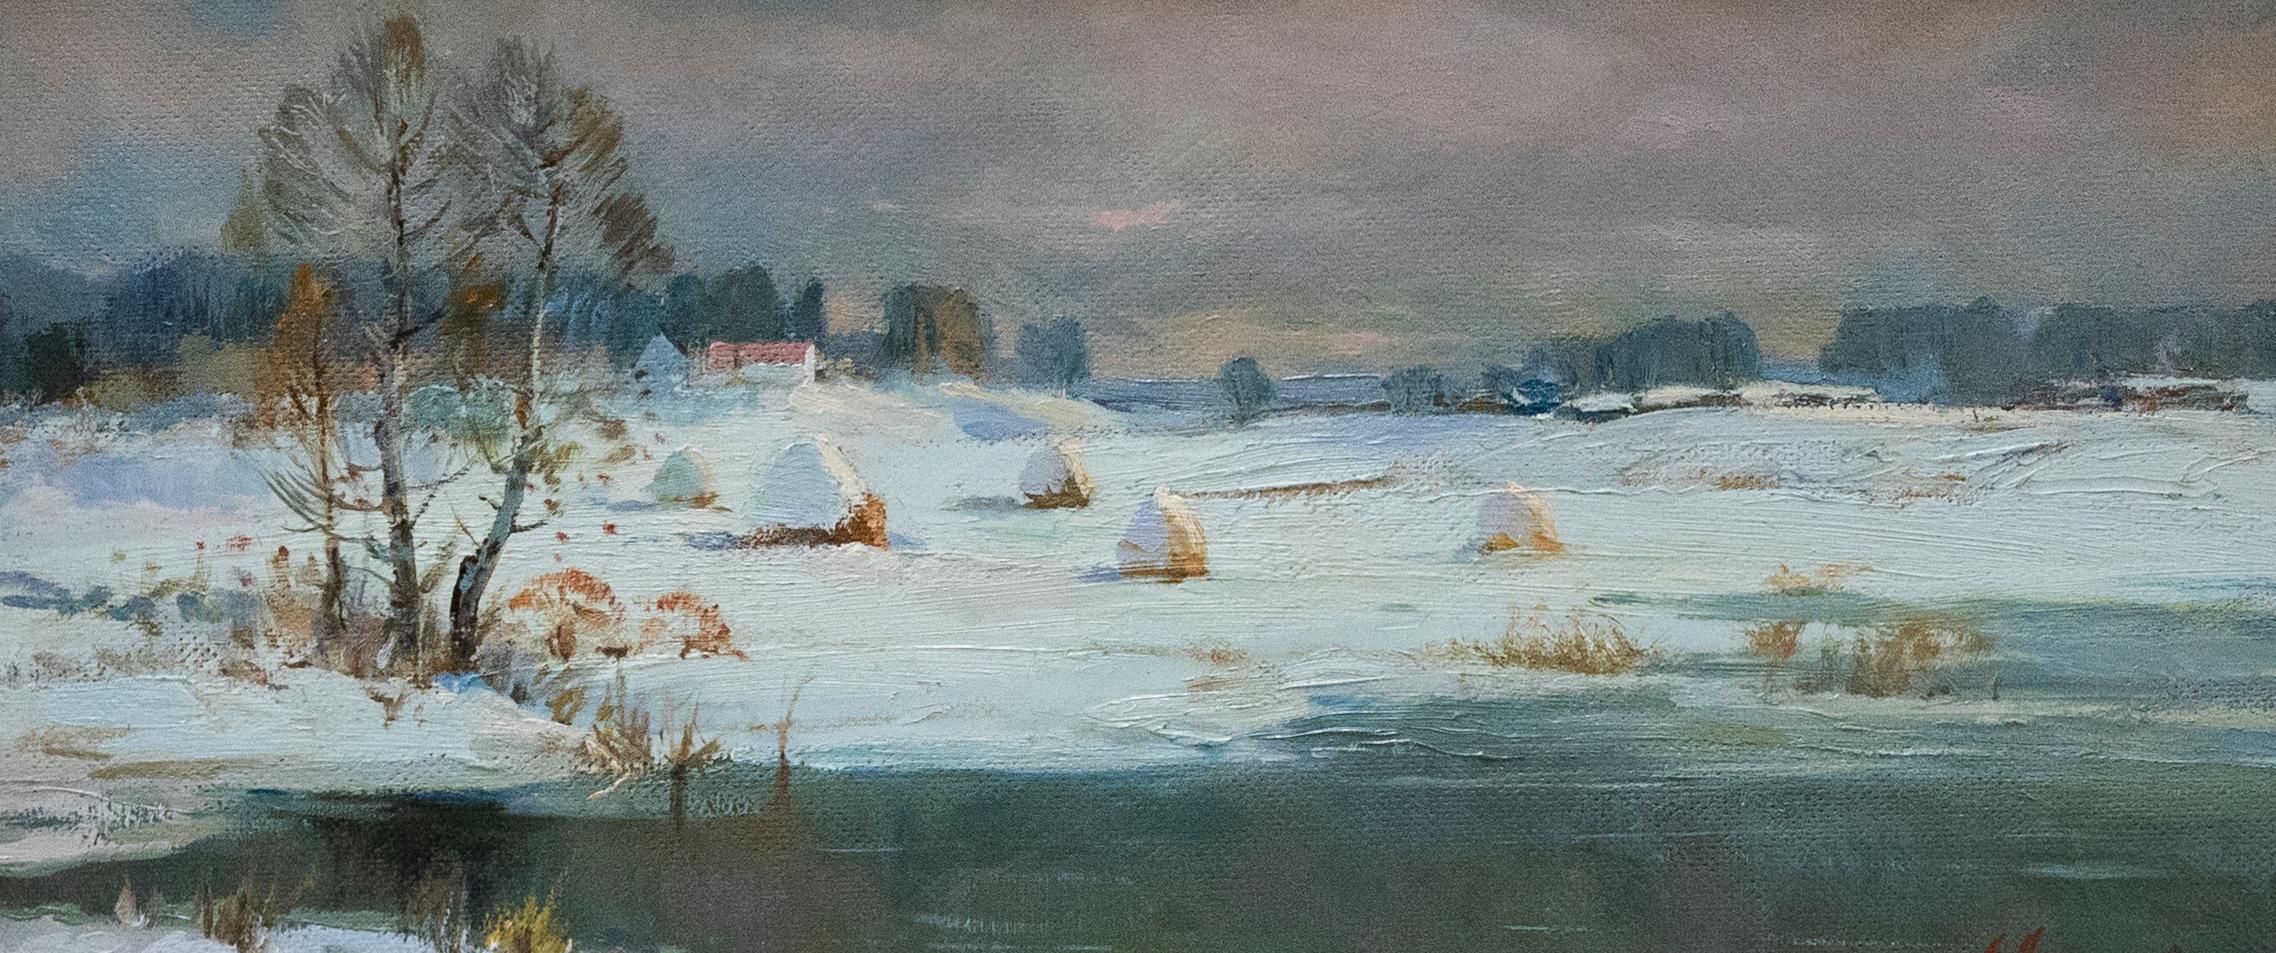 Anatoly Nikolaevich Ladnov (b.1935) - Russian  20th Century Oil, A Frosty Day - Painting by Unknown